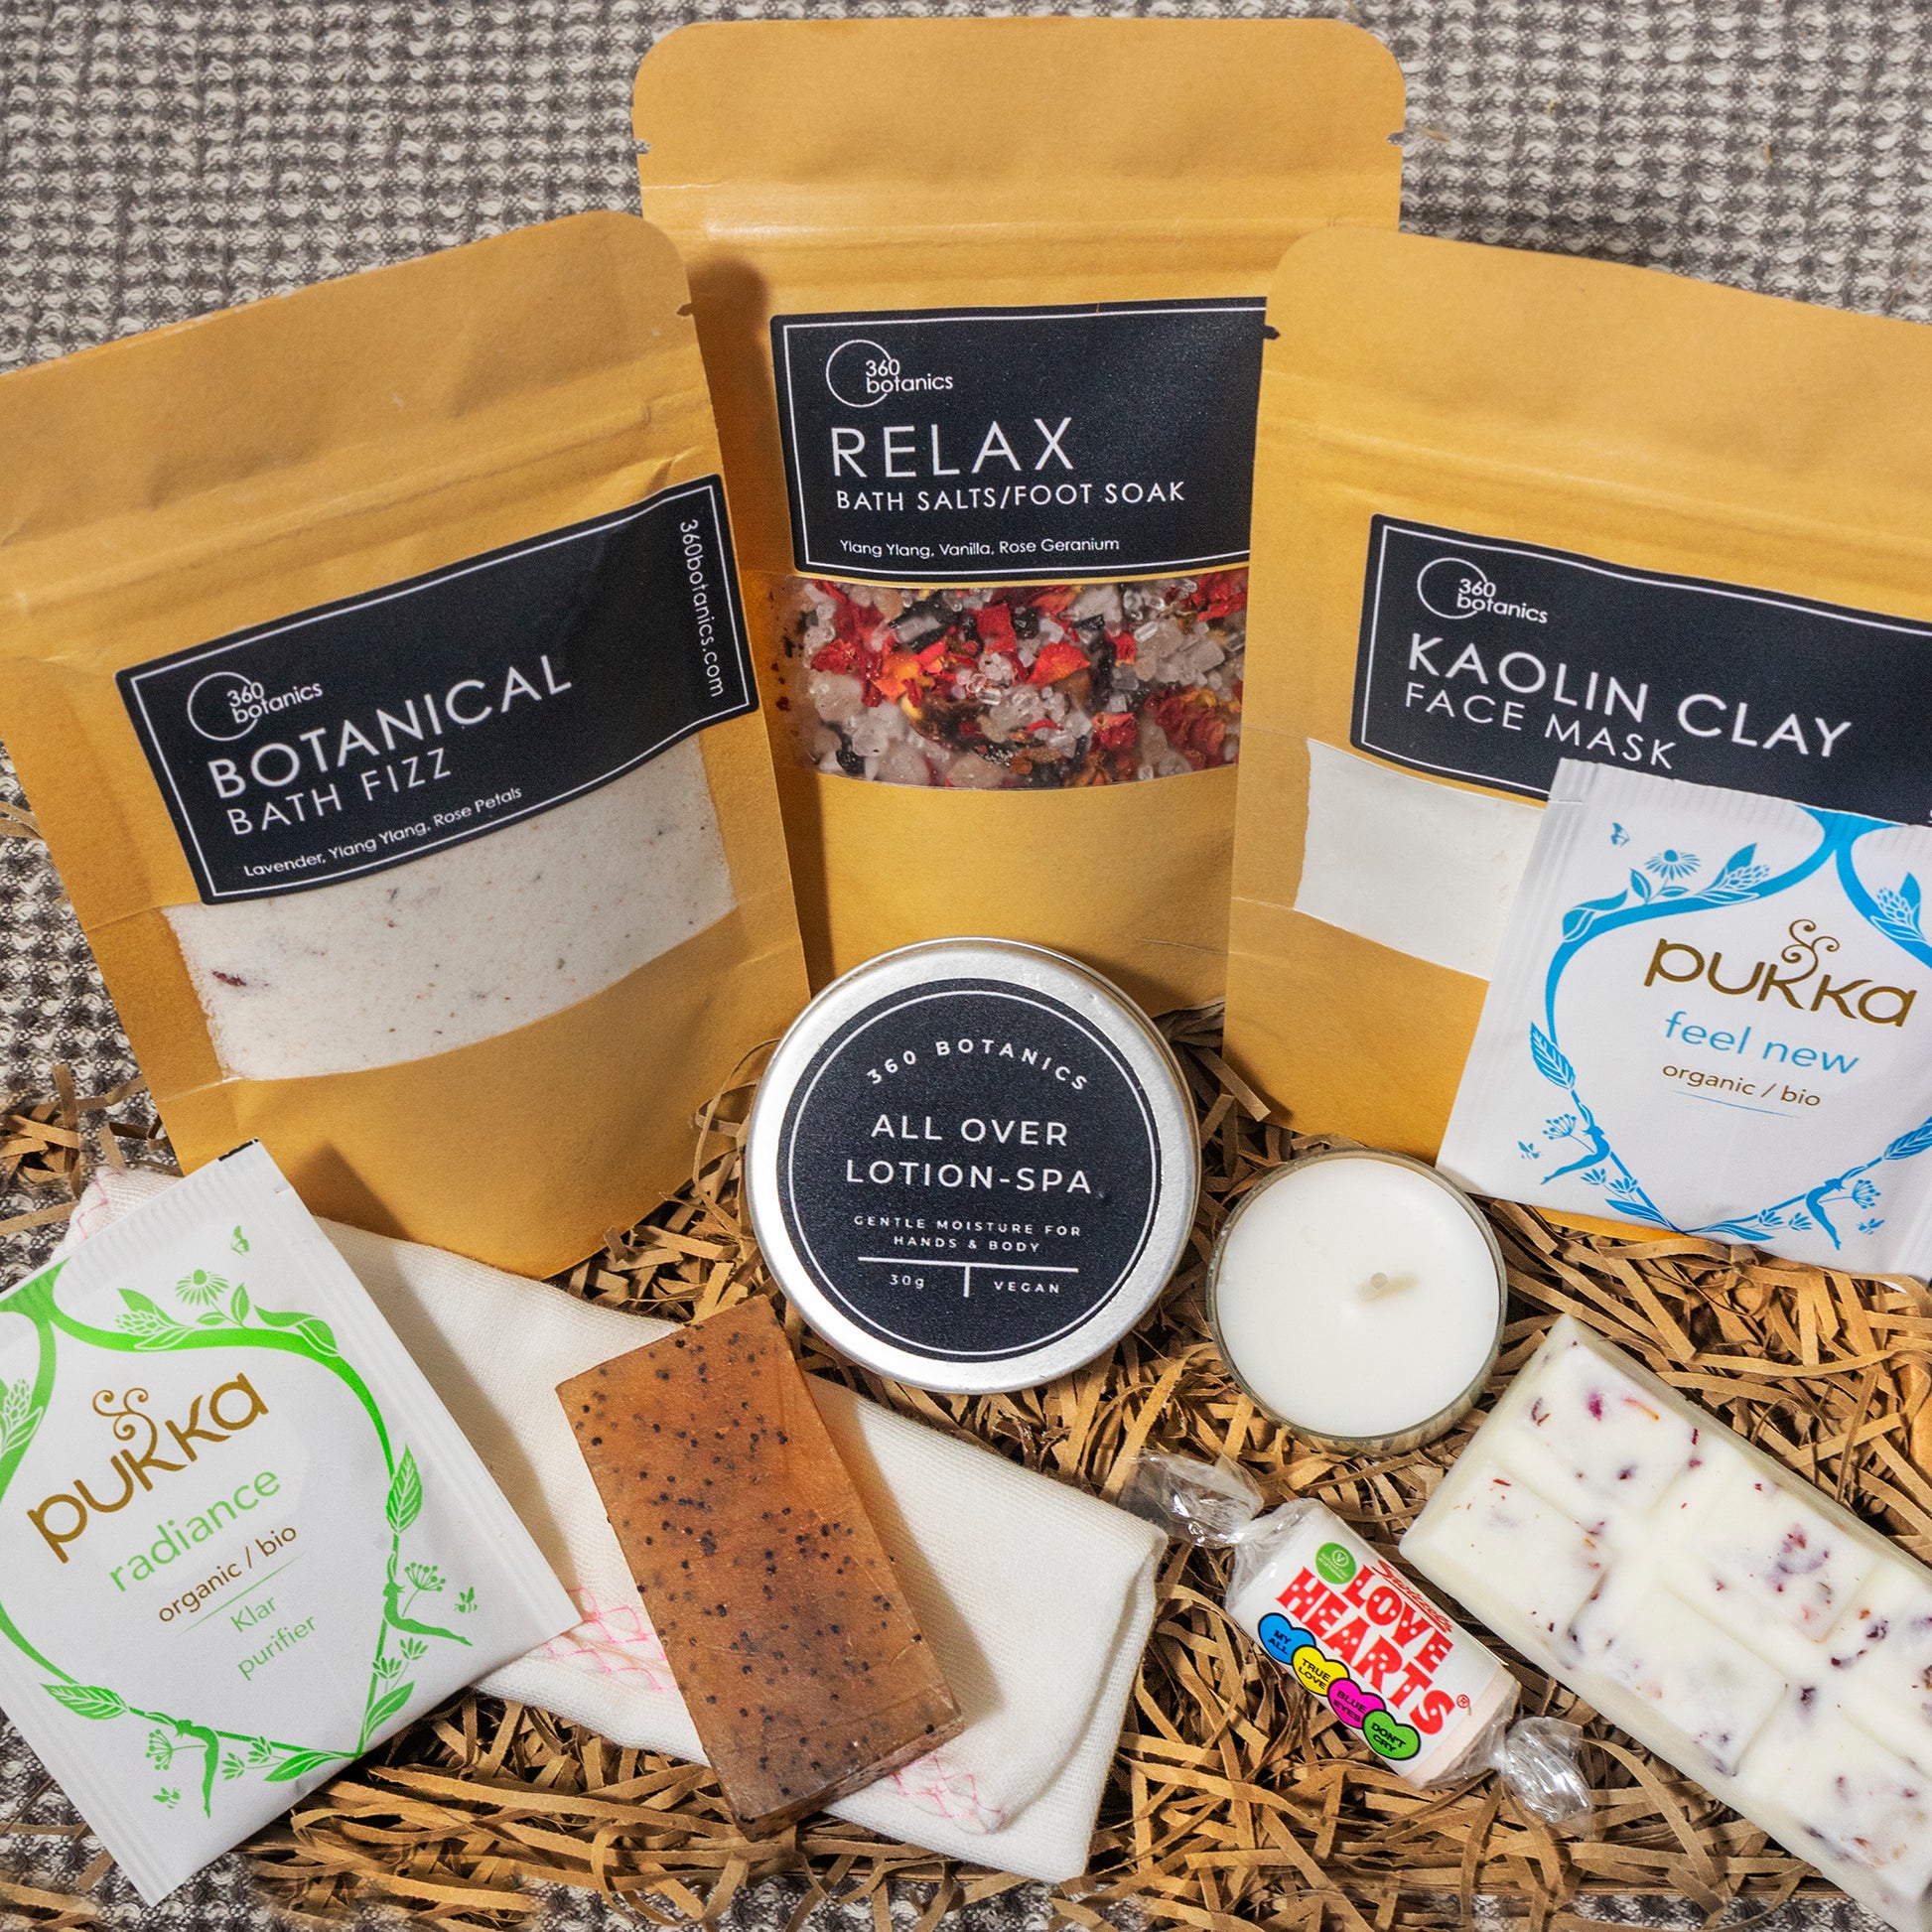 An assortment of bath and body products displayed on a herringbone patterned fabric. The collection includes 360 Botanics Botanical Bath Fizz, Relax Bath Salts/Foot Soak, Kaolin Clay Face Mask packets, an All Over Lotion-SPA in a tin, Pukka herbal tea packets in 'radiance' and 'feel new' varieties, a bar of exfoliating soap, a small white candle, and a Love Hearts candy roll, all presented on a bed of natural wood straw.